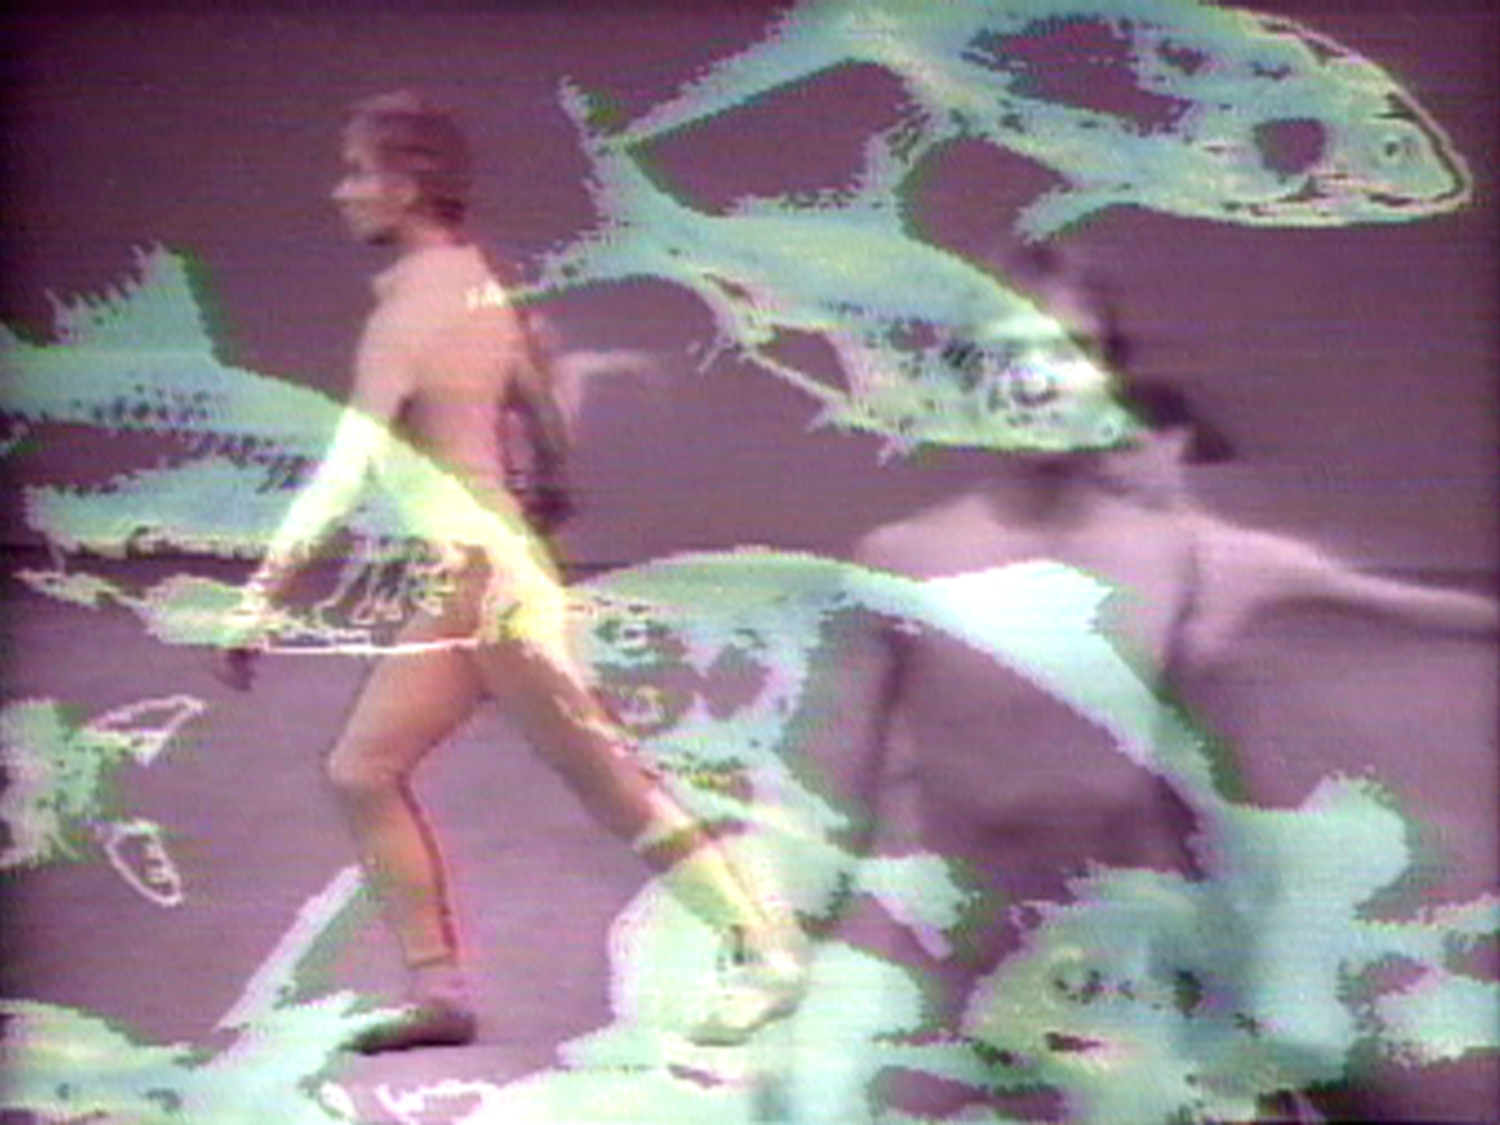 Merce by Merce by Paik: Part One: Blue Studio: Five Segments 1975-1976. Part of Merce by Merce by Nam June Paik. In collaboration with Charles Atlas, Merce Cunningham, and Shigeko Kubota. Music: John Cage, David Held. Host: Russell Connor Courtesy of Electronic Arts Intermix (EAI), New York